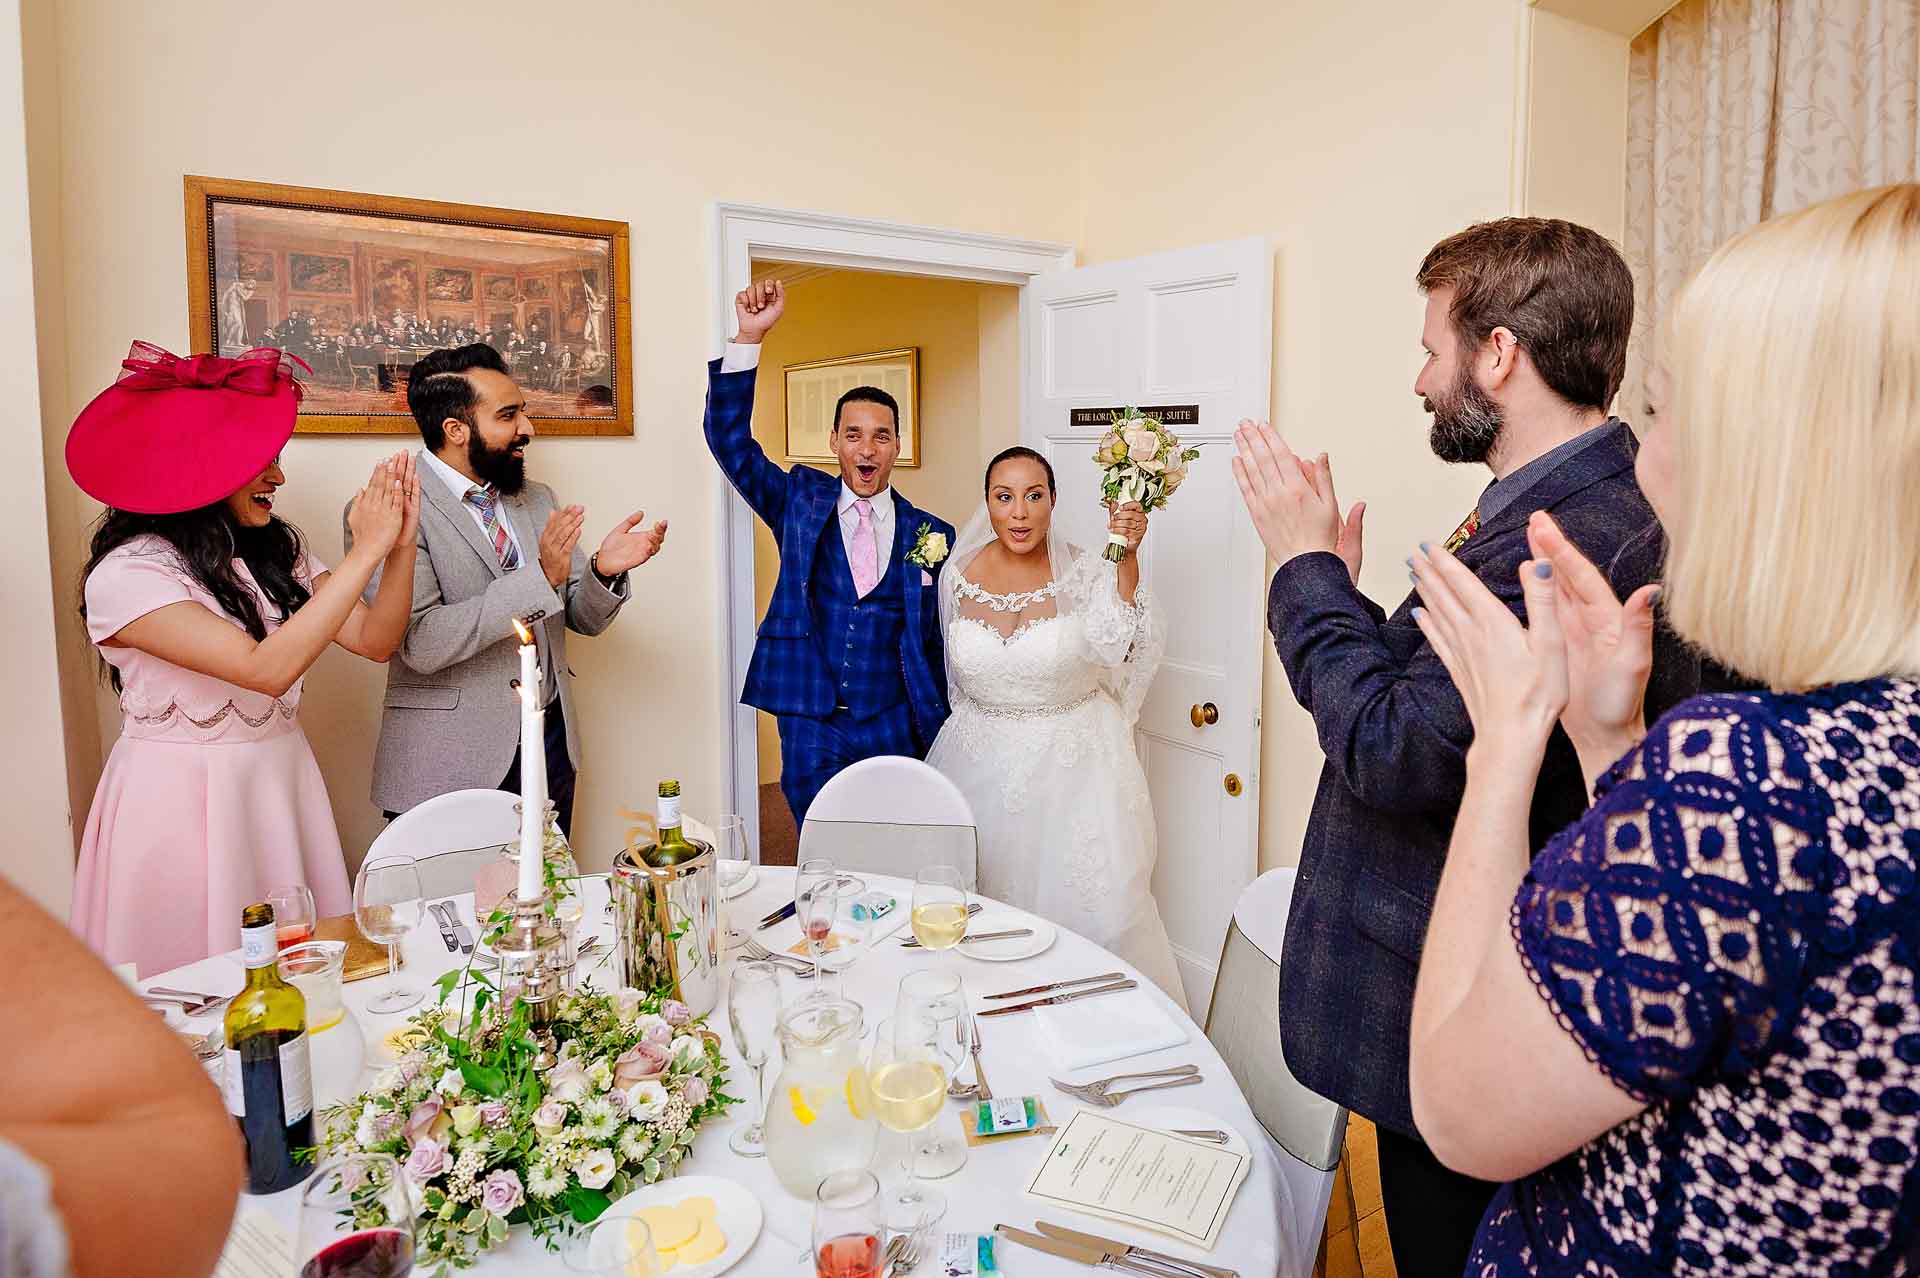 Newly-weds Entering Dining Room for Wedding Breakfast - Groom with Fist in Air Cheering